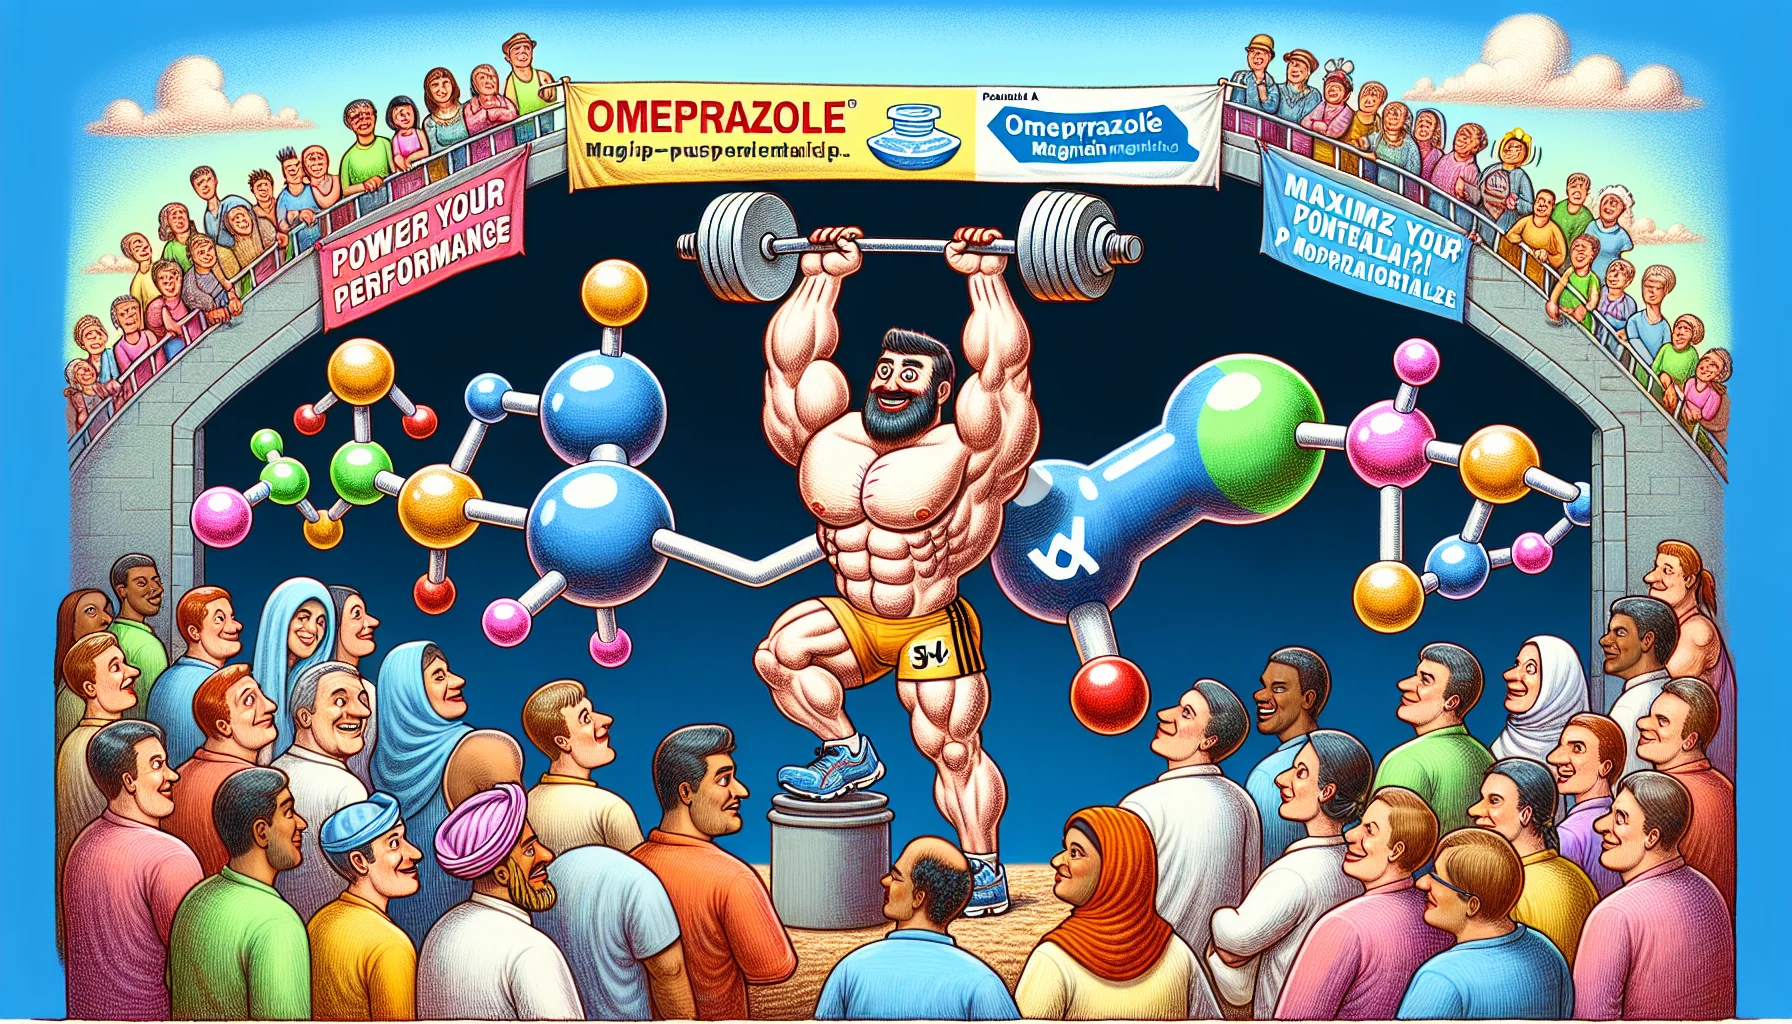 Draw an amusing and captivating scene suggesting the utilization of dietary supplements for sports activities. A large, friendly upper body muscular person with a Caucasian descent is seen lifting a giant, oddly shaped barbell that looks like an omeprazole magnesium molecule. A crowd of diverse spectators, including a Hispanic woman and a Middle-Eastern man, are watching with impressed and intrigued expressions. Vibrant banners in the background cheer on the participants with slogans such as 'Power Your Performance' and 'Maximize Your Potential'. The atmosphere is lively and full of energy, conveying the benefits and of adding omeprazole to a sports regimen.